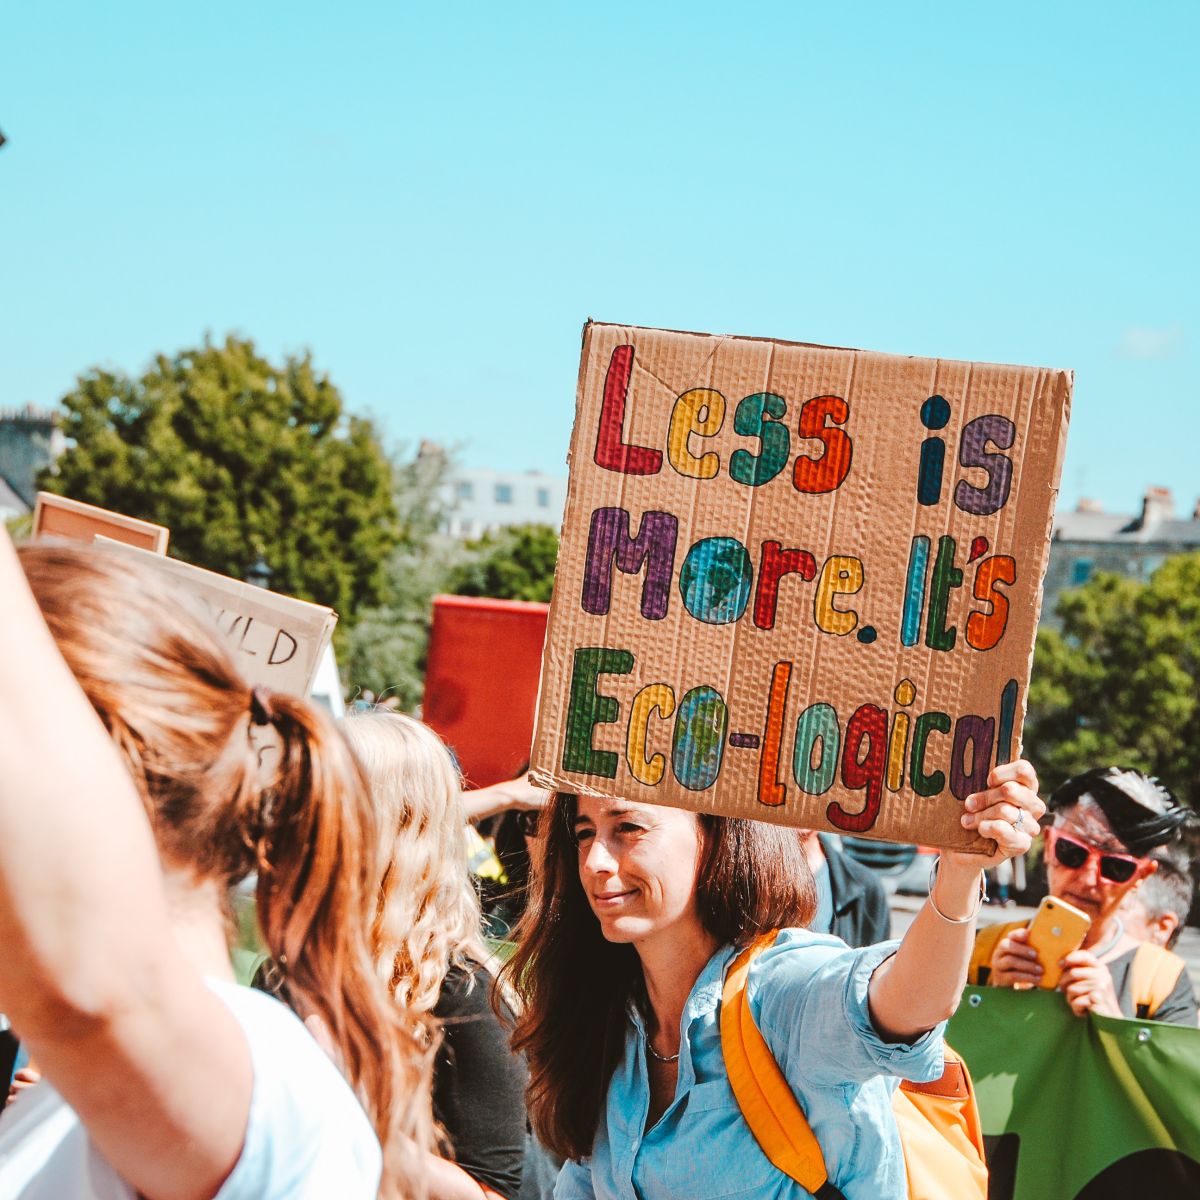 Less is more protester sign eco-friendly zero waste